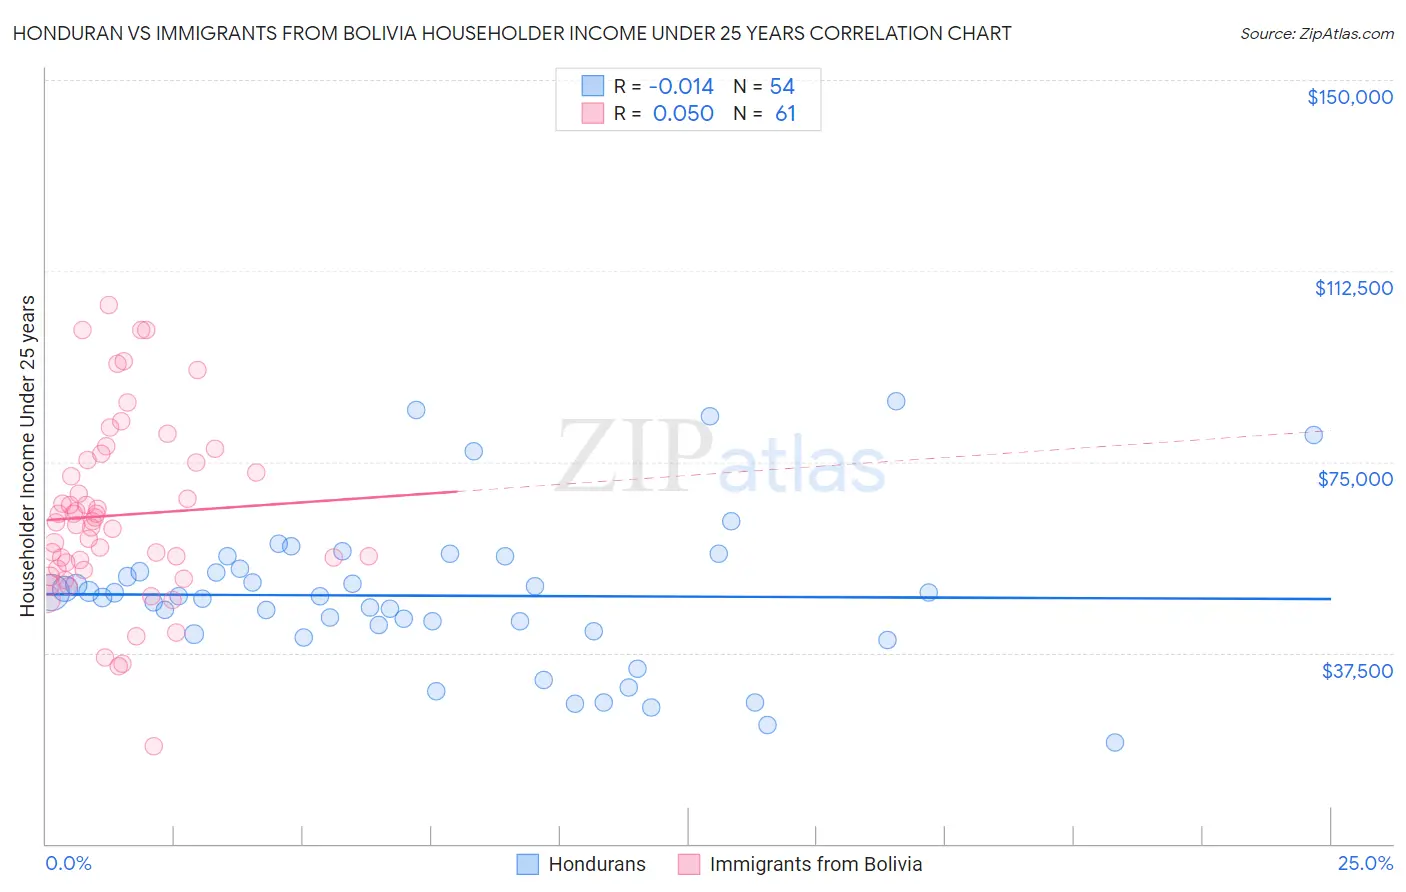 Honduran vs Immigrants from Bolivia Householder Income Under 25 years